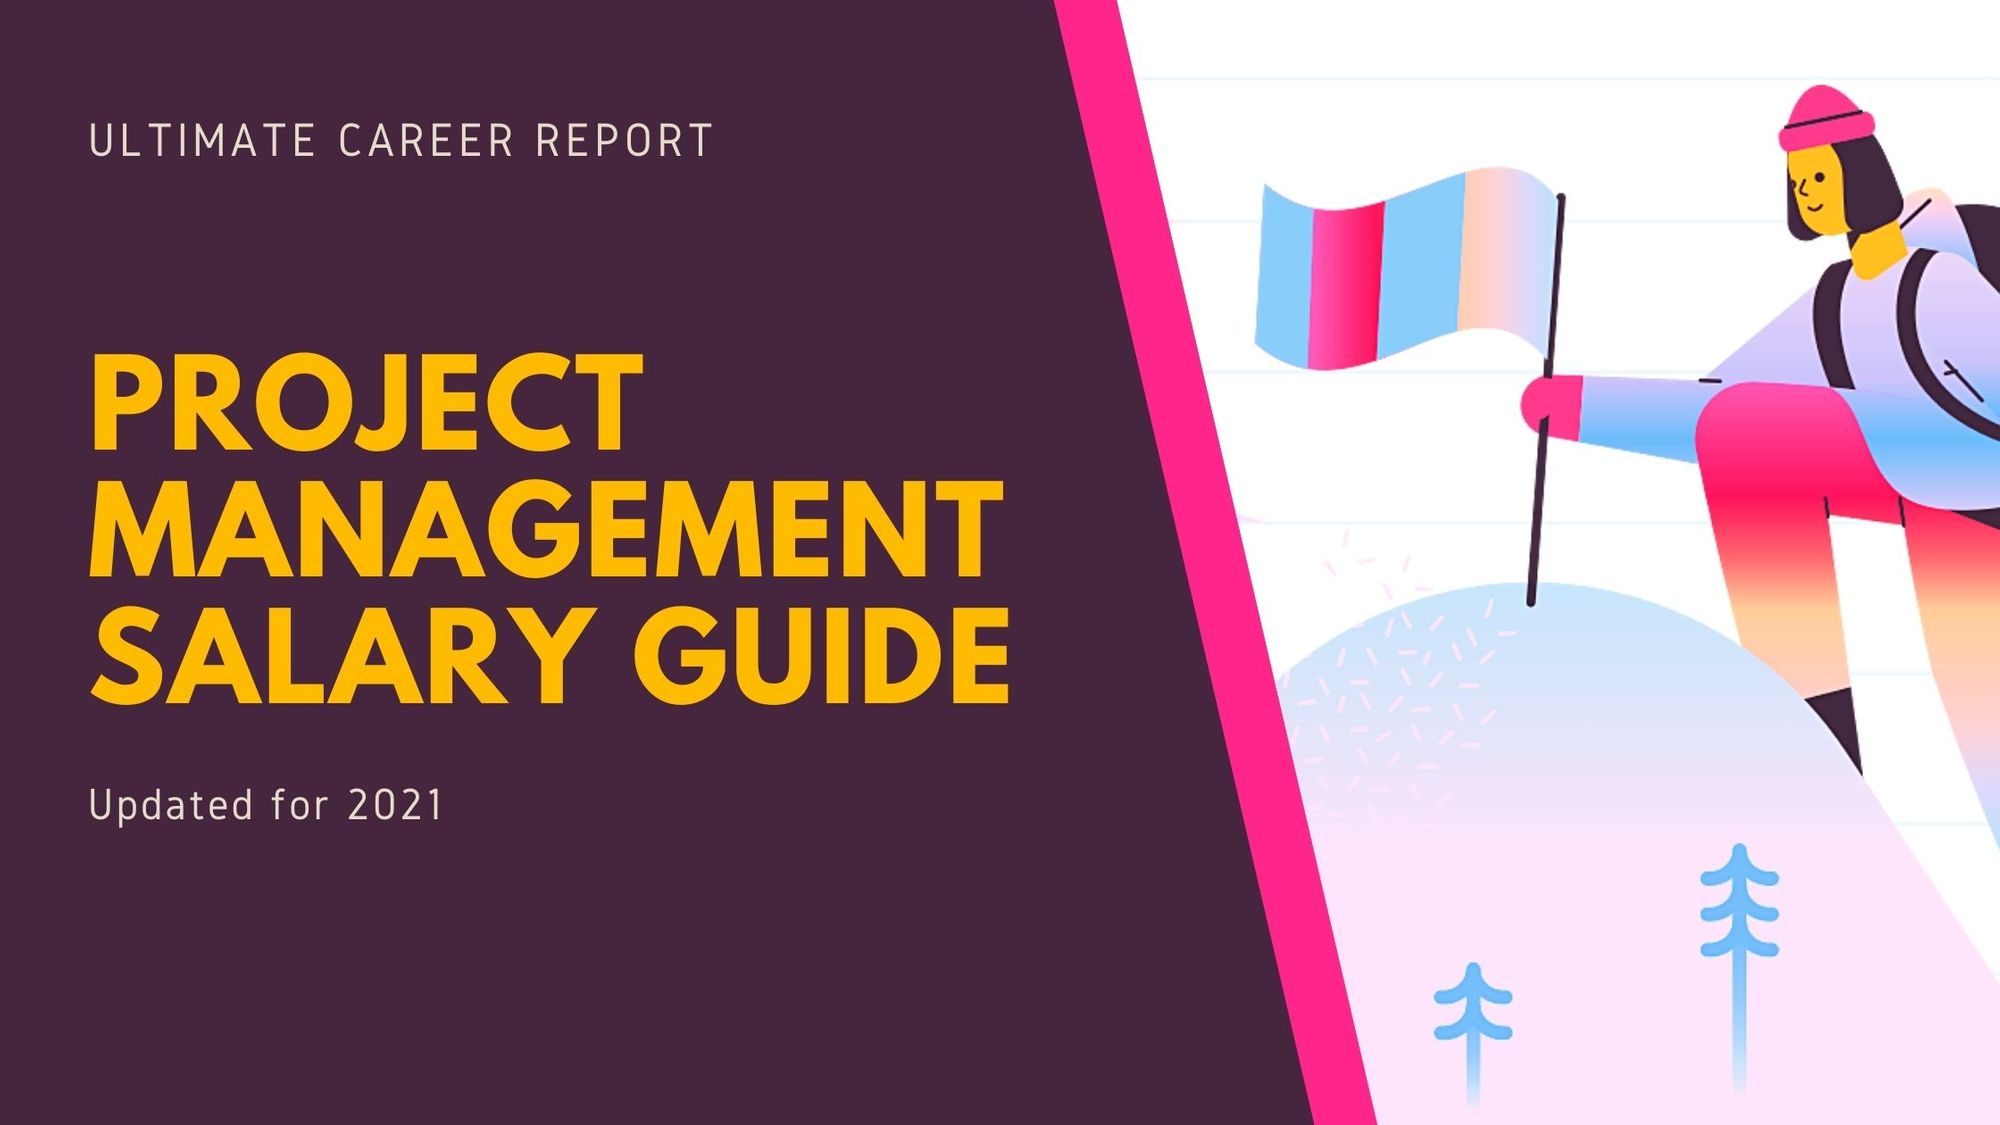 Project Manager Salary Guide For 2021 - Ultimate Career Report